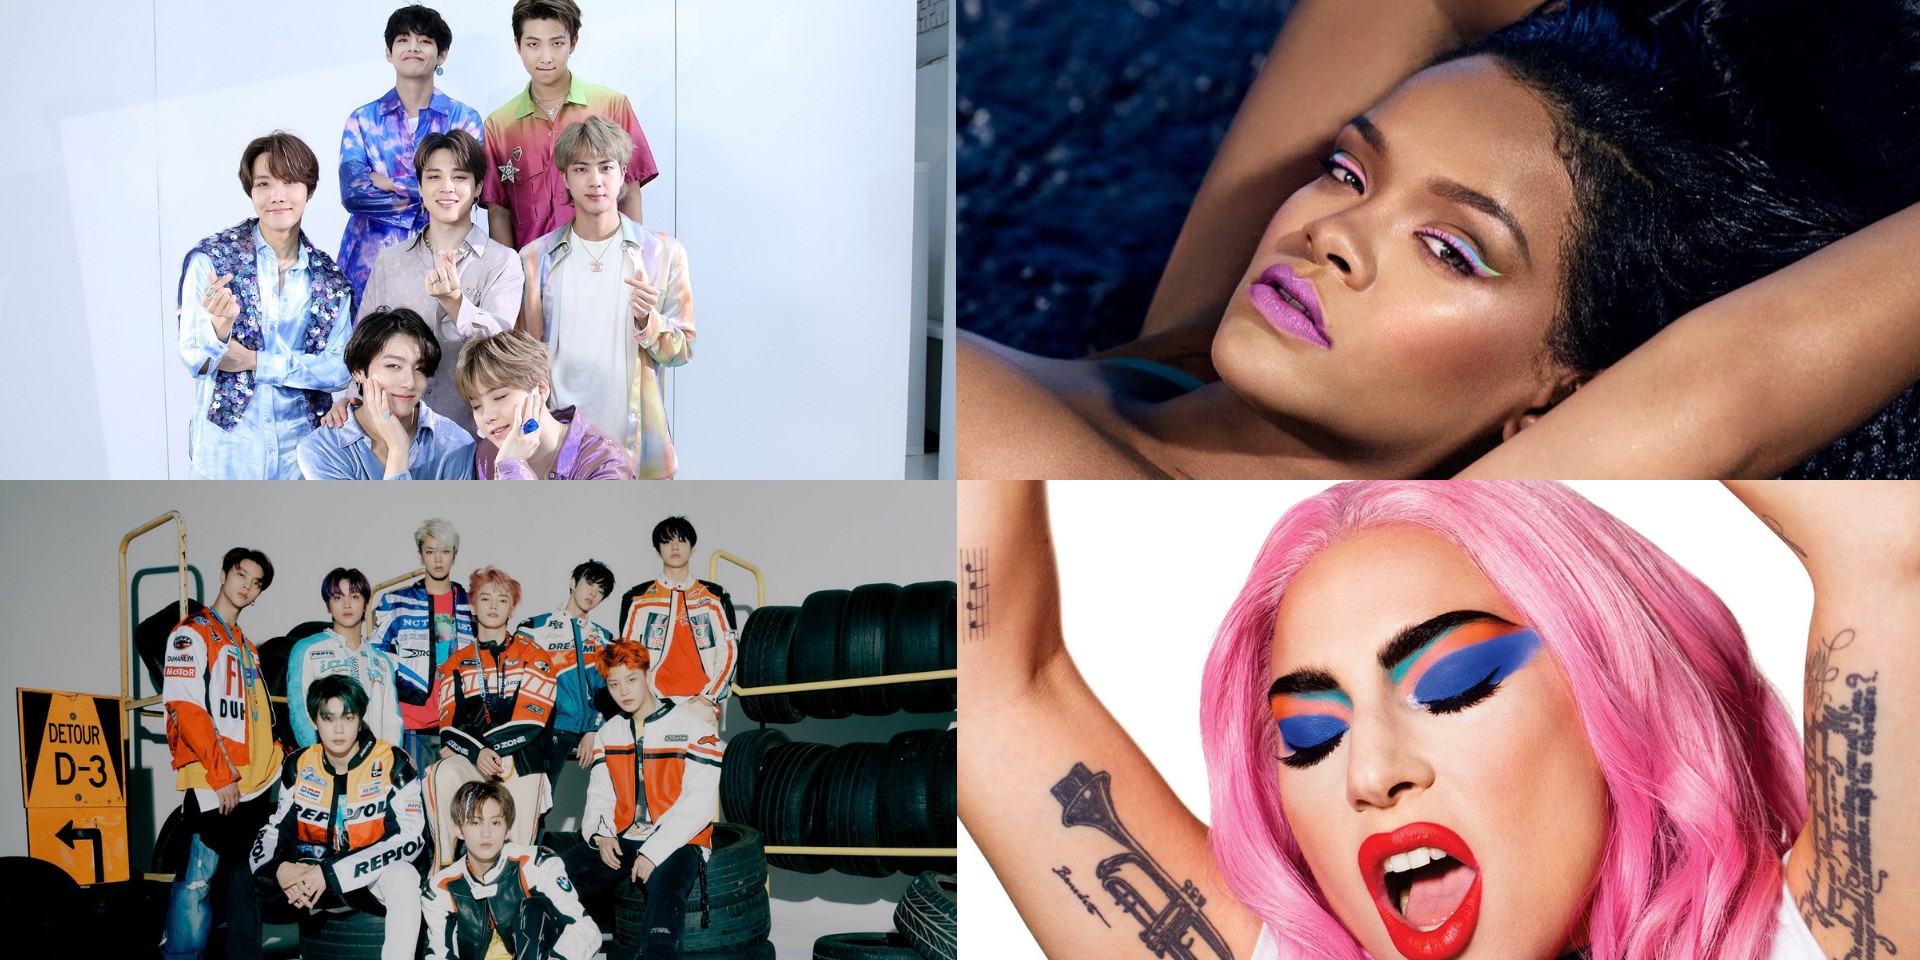 8 beauty collections by musicians: Rihanna, Lady Gaga, BTS, NCT 127, and more 